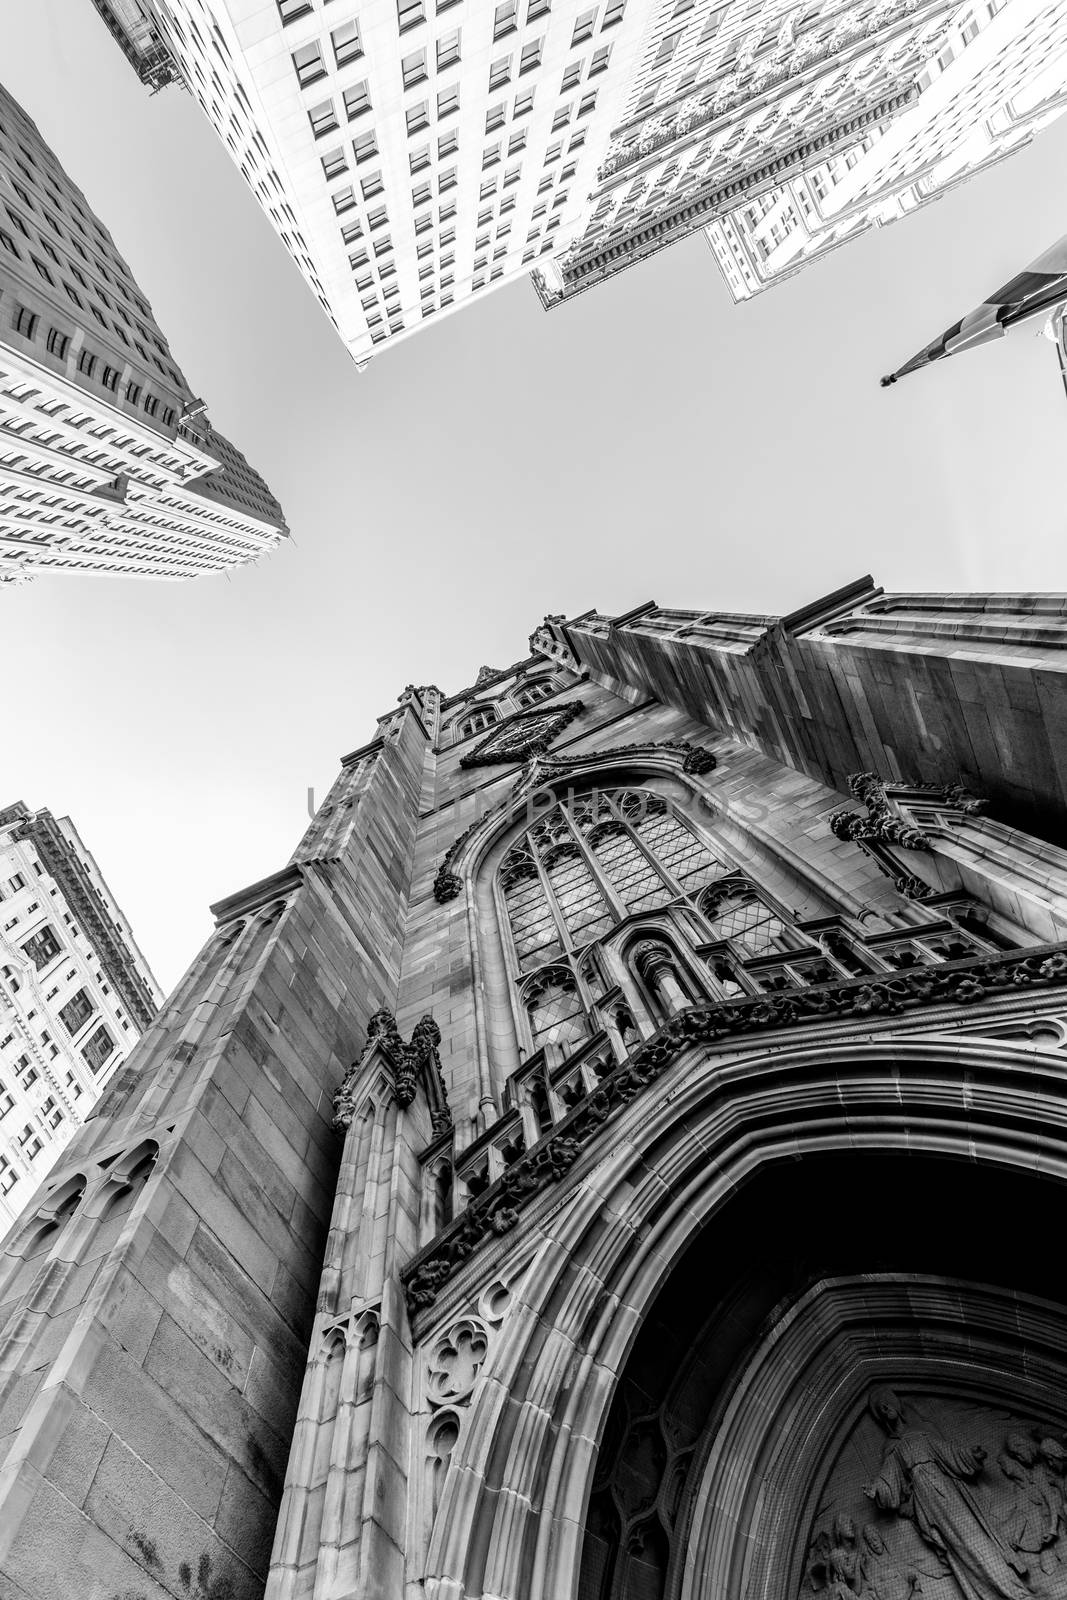 Wide angle upward view of Trinity Church at Broadway and Wall Street with surrounding skyscrapers, Lower Manhattan, New York City, USA. Black and white image.